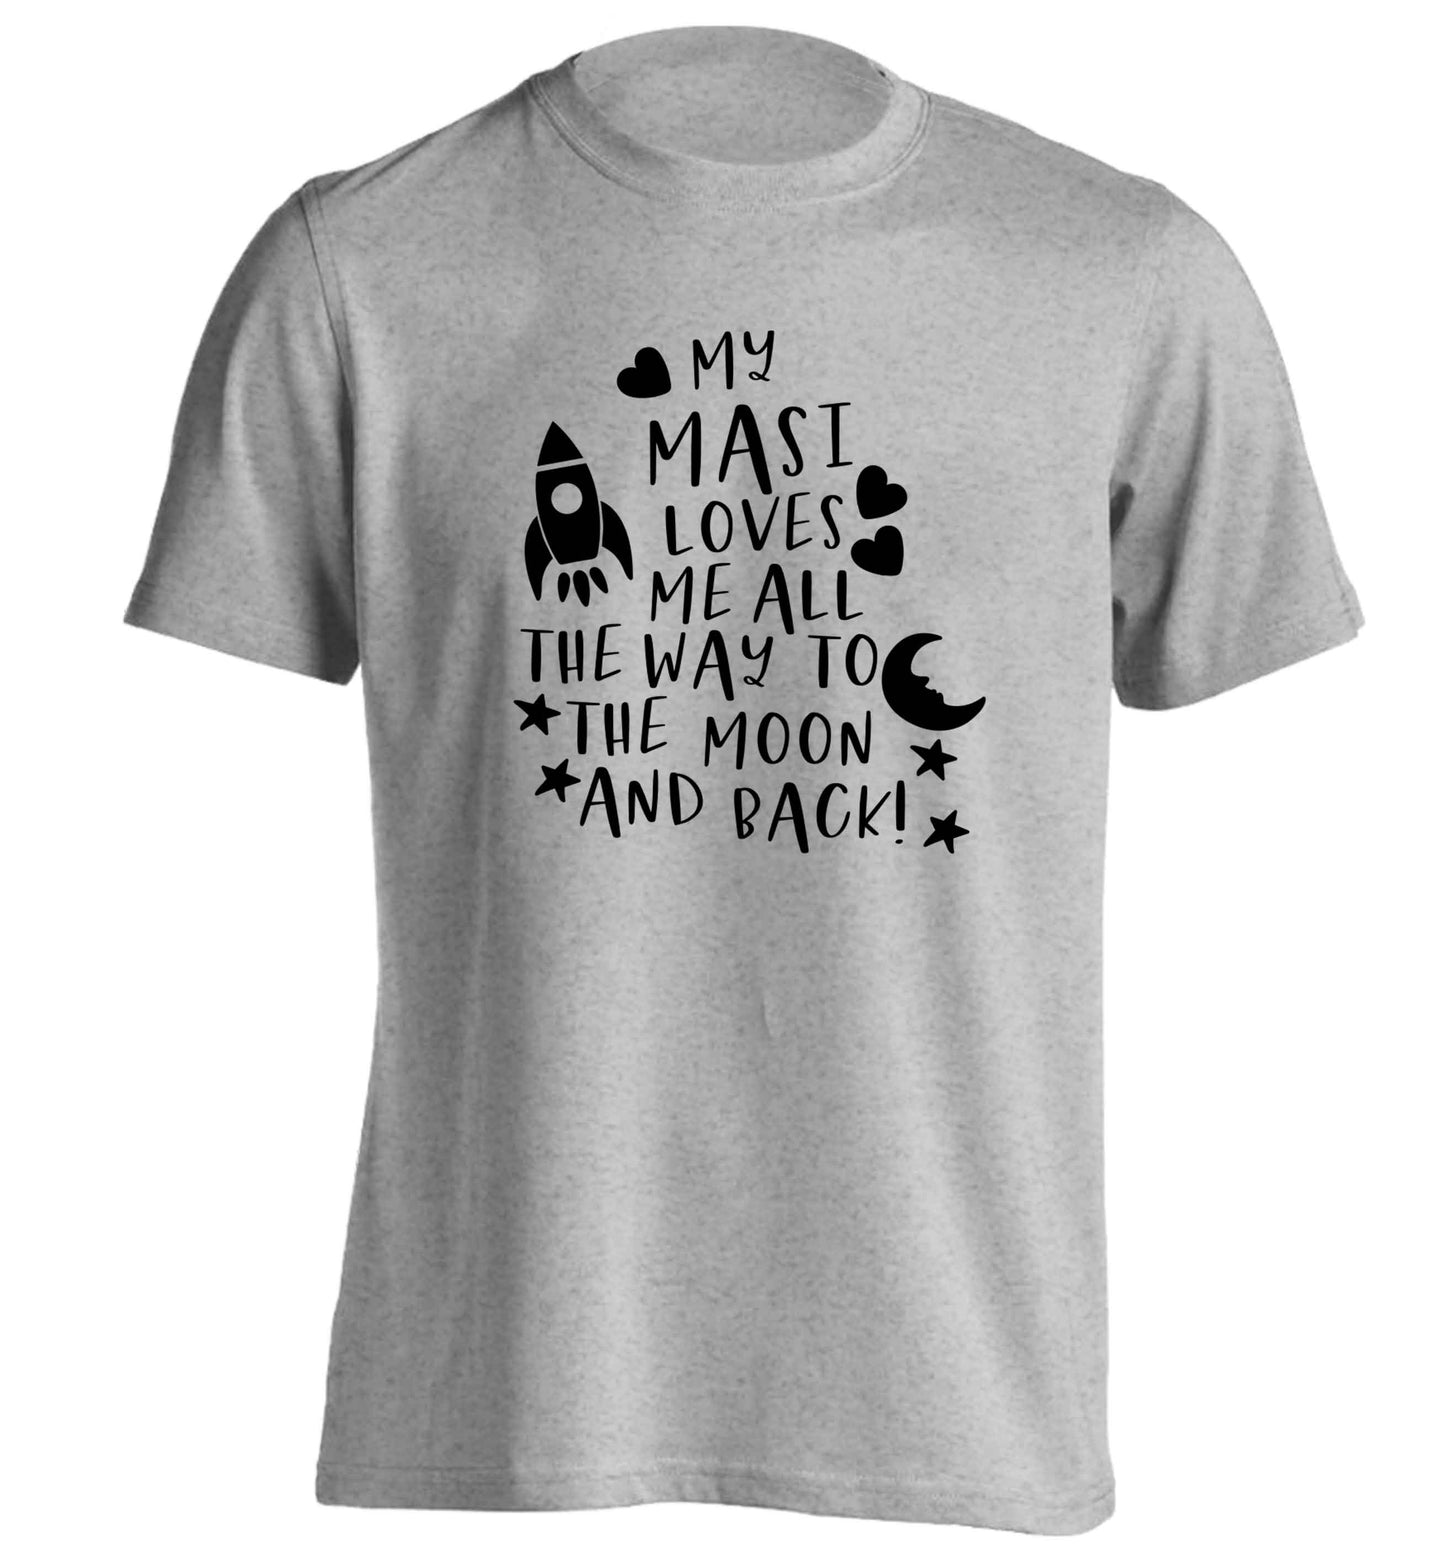 My masi loves me all the way to the moon and back adults unisex grey Tshirt 2XL